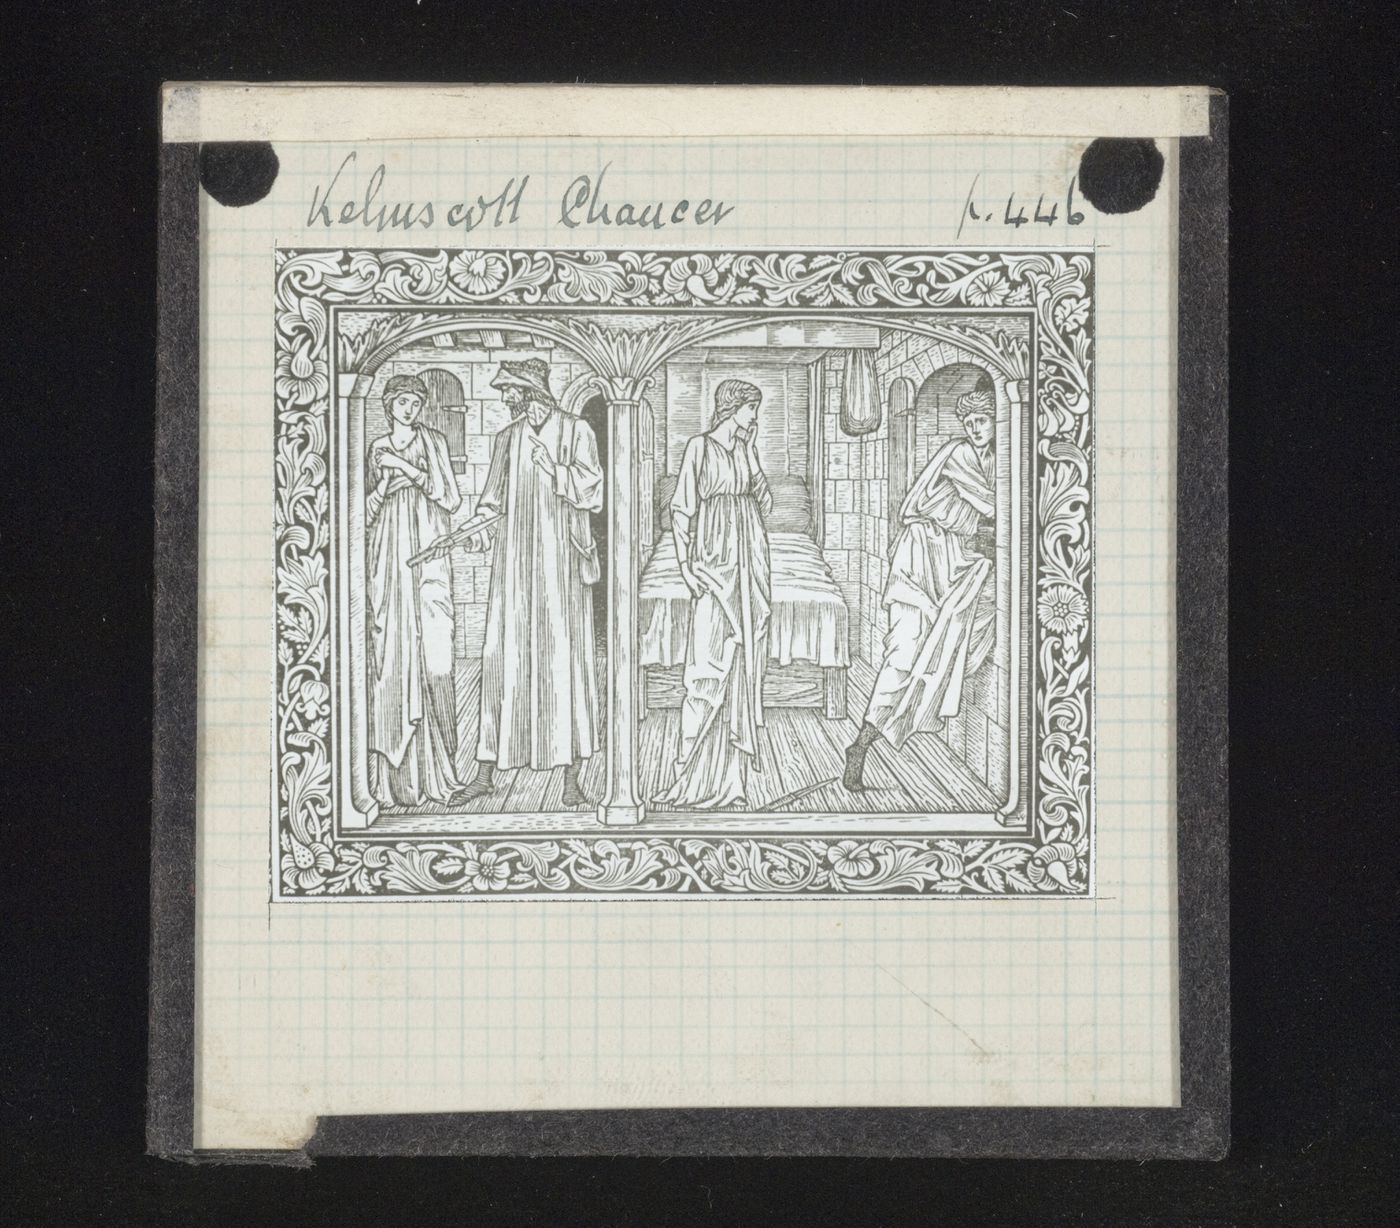 View of illustration in 'The Works of Geoffrey Chaucer'